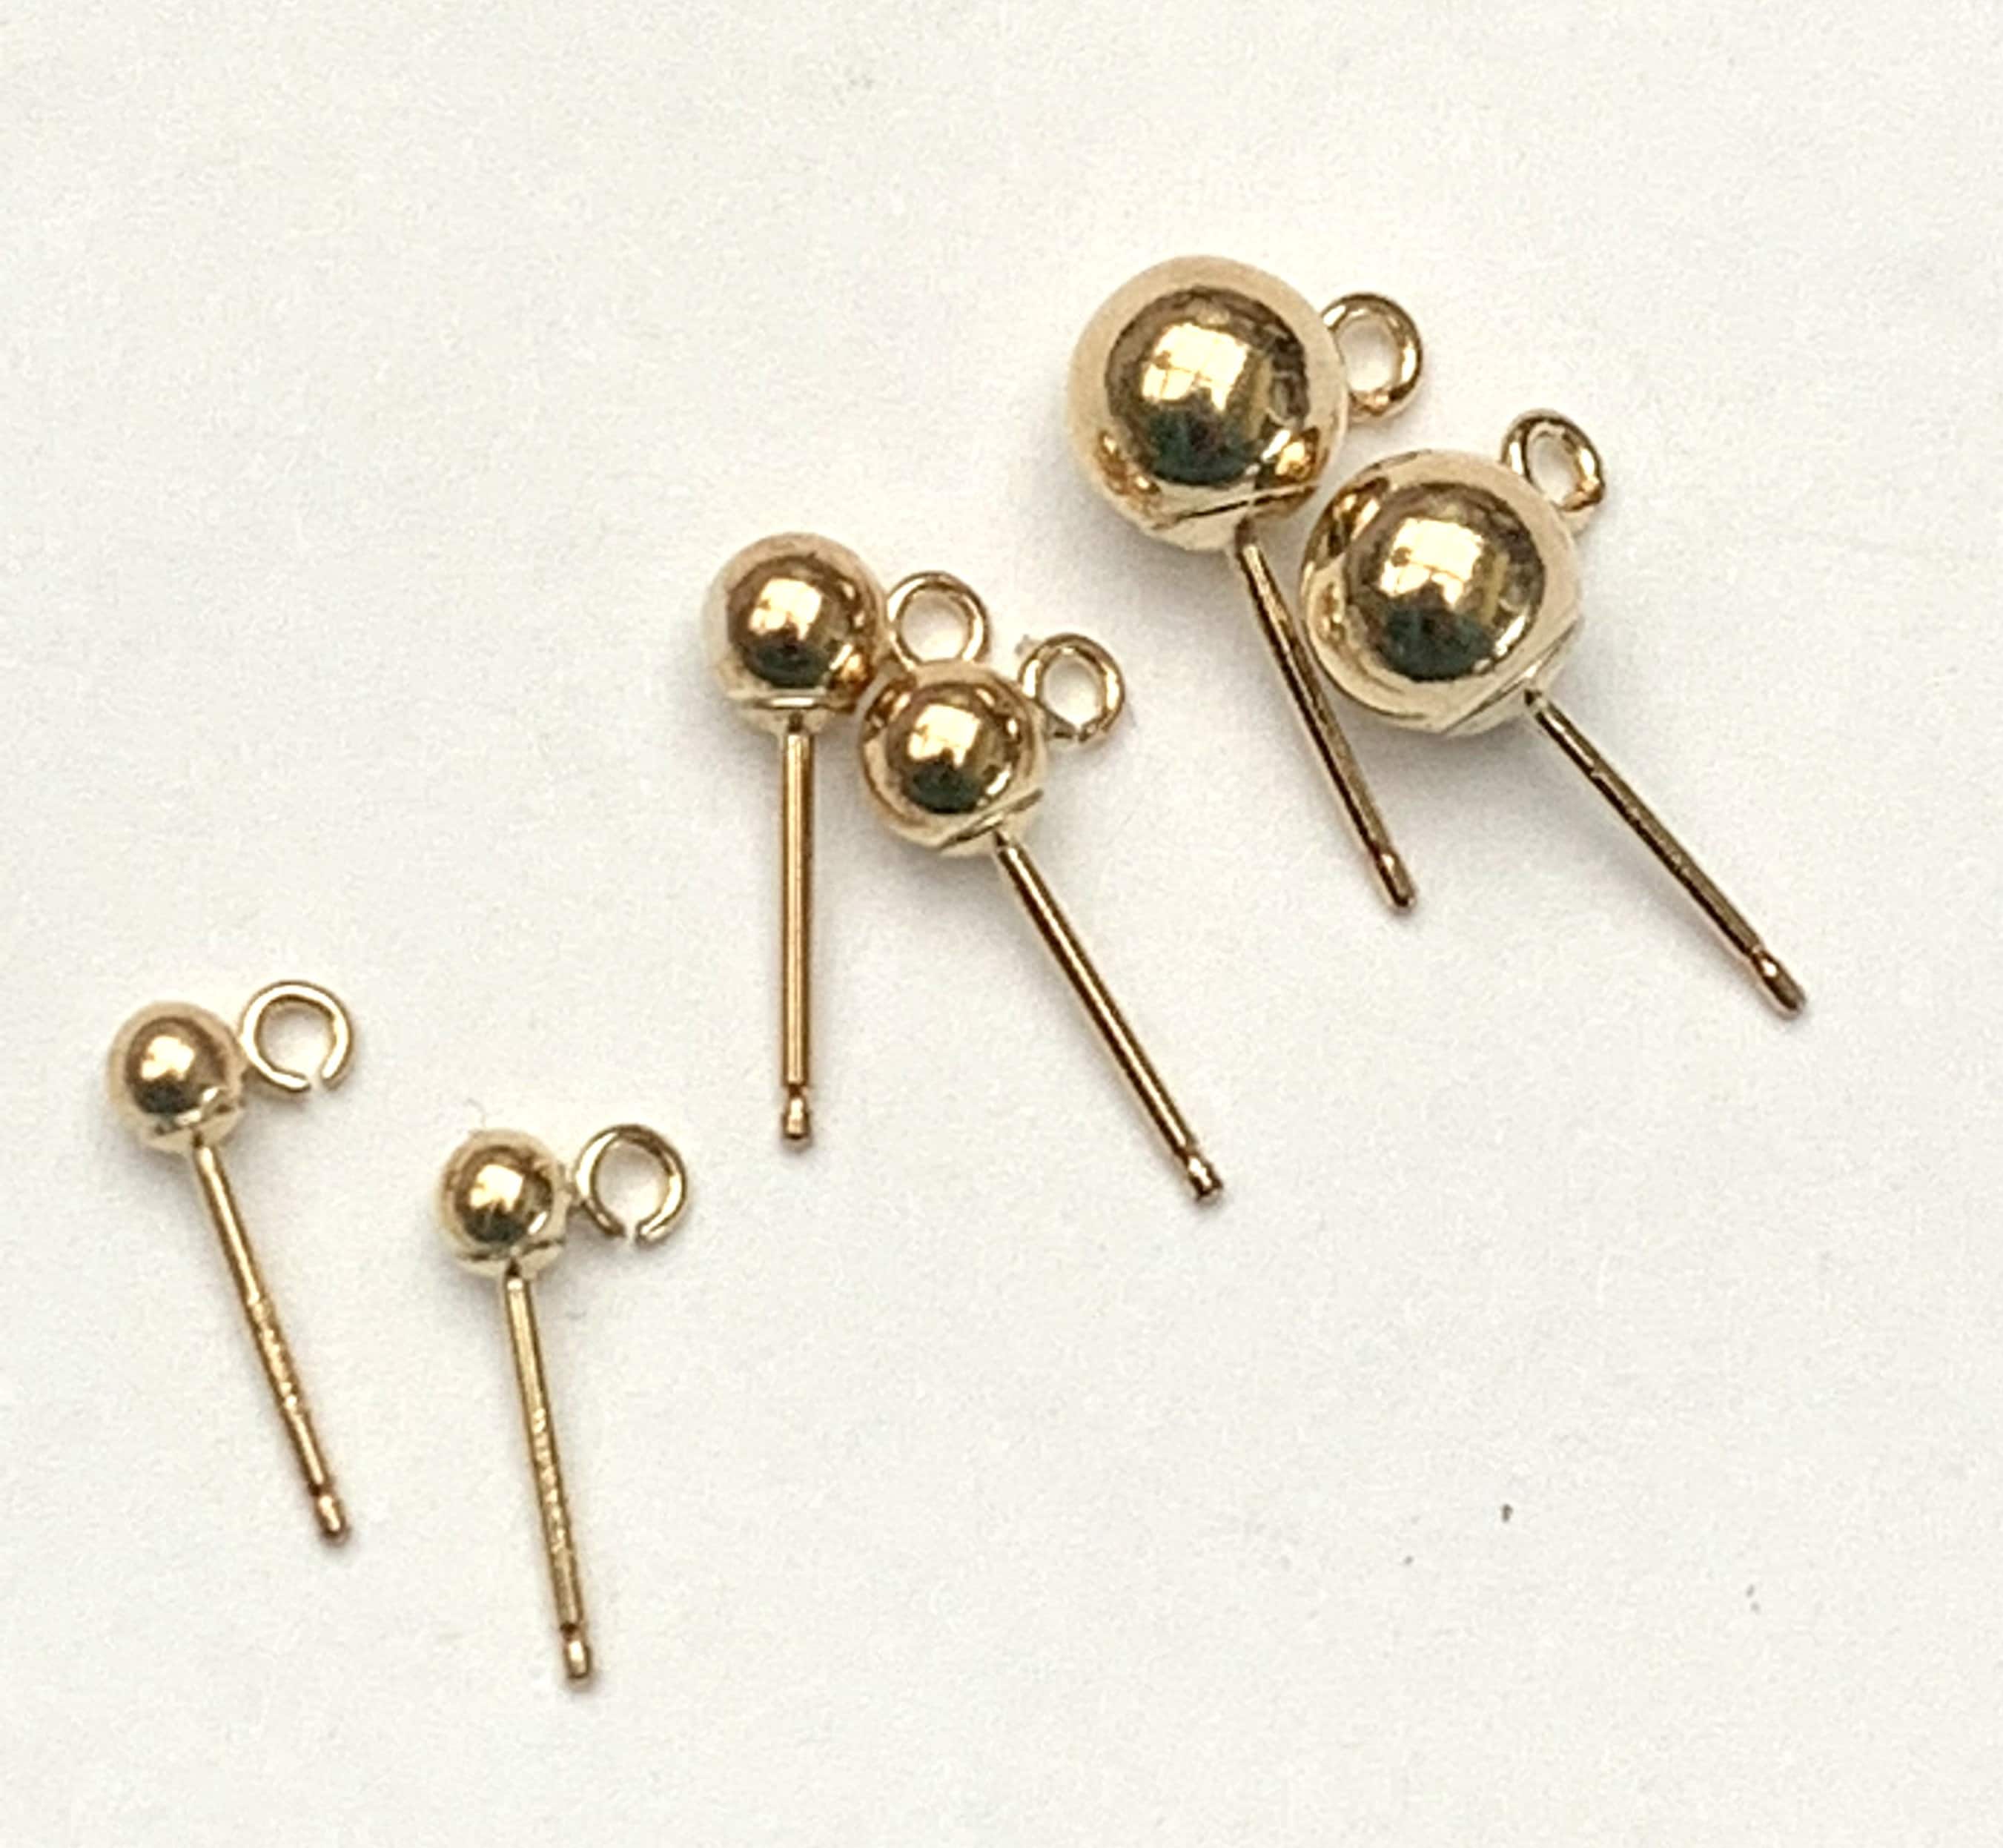 Small Gold Filled Stud Earrings,Hypoallergenic Earrings Studs,Minimalist Earrings, Everyday Earrings,Teen Girl Gifts,Flower Girl Jewelry